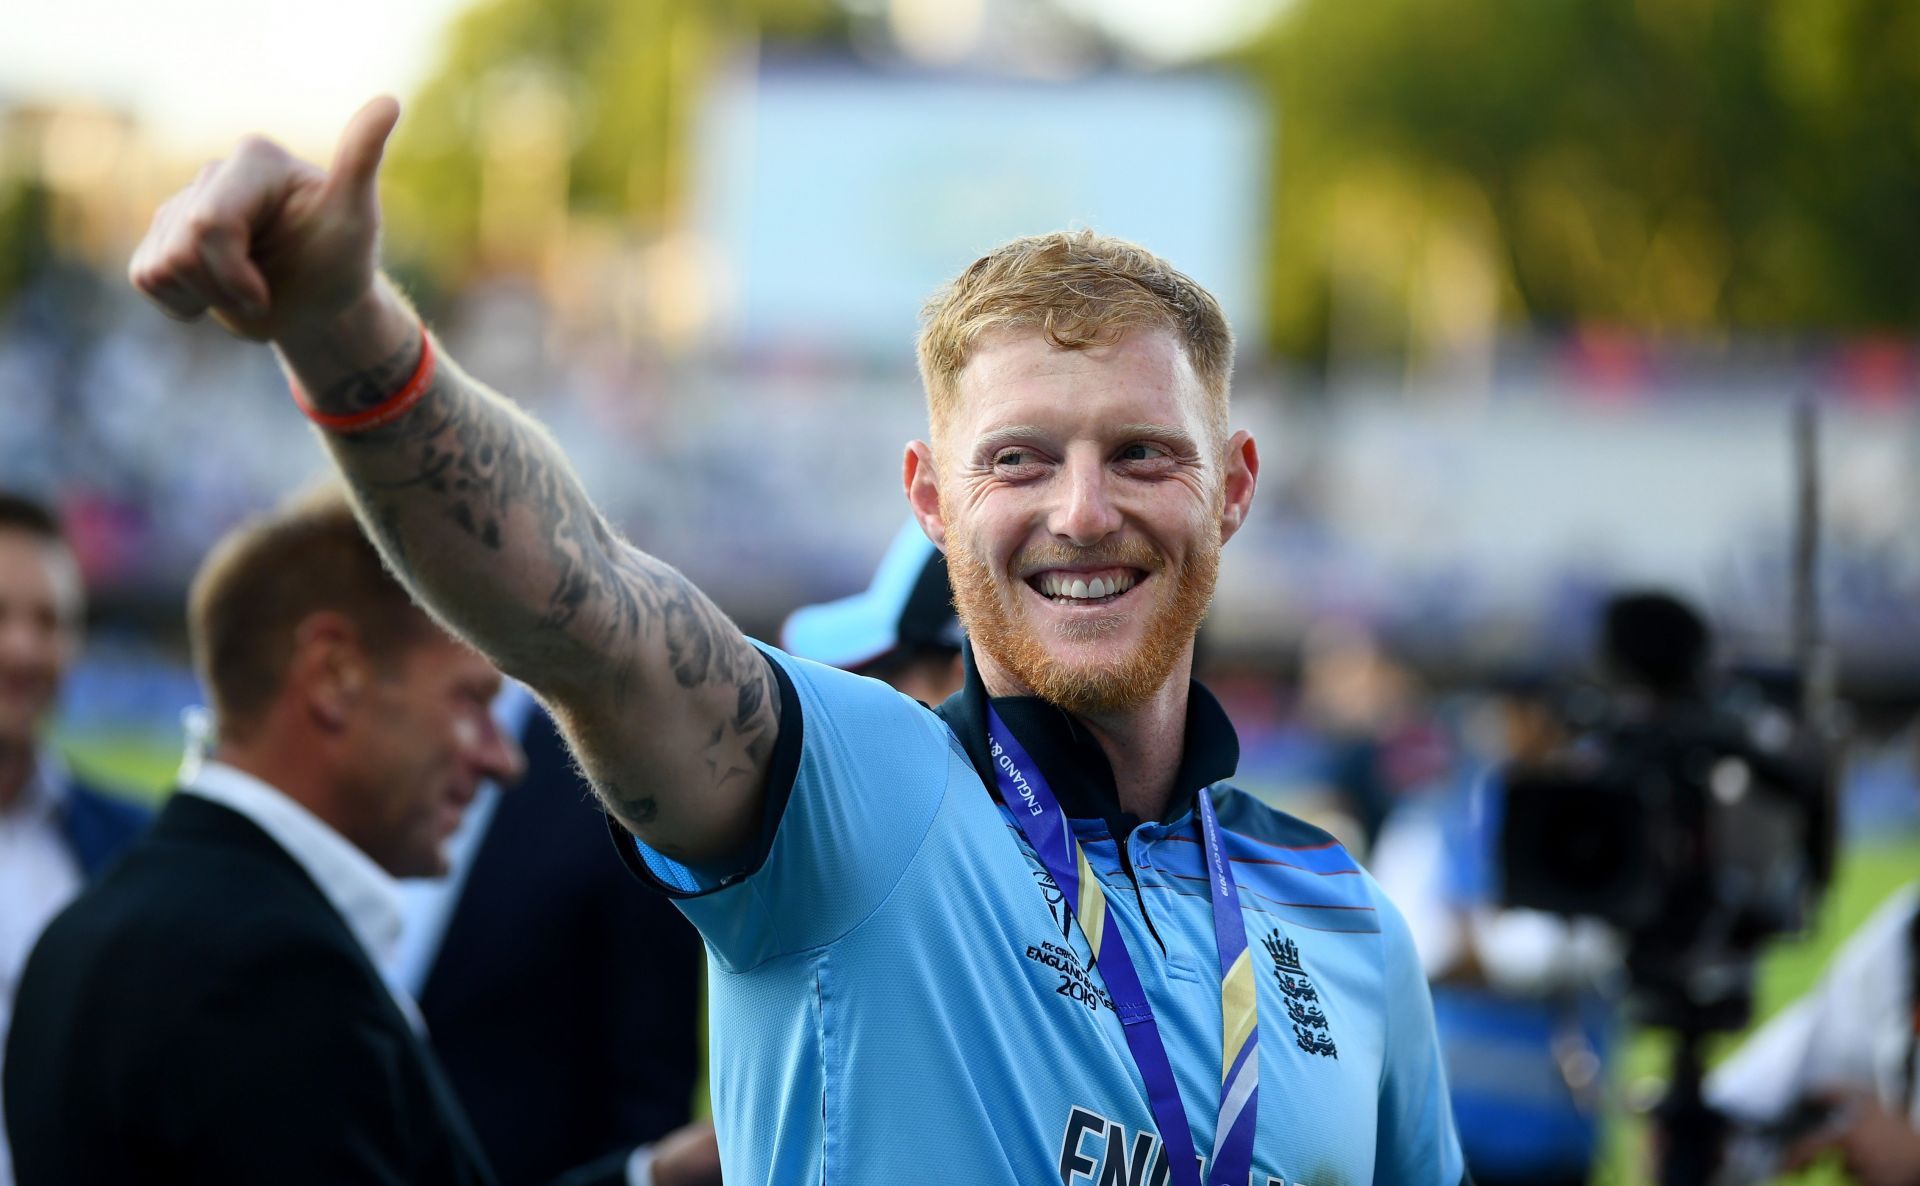 Ben Stokes was one of England